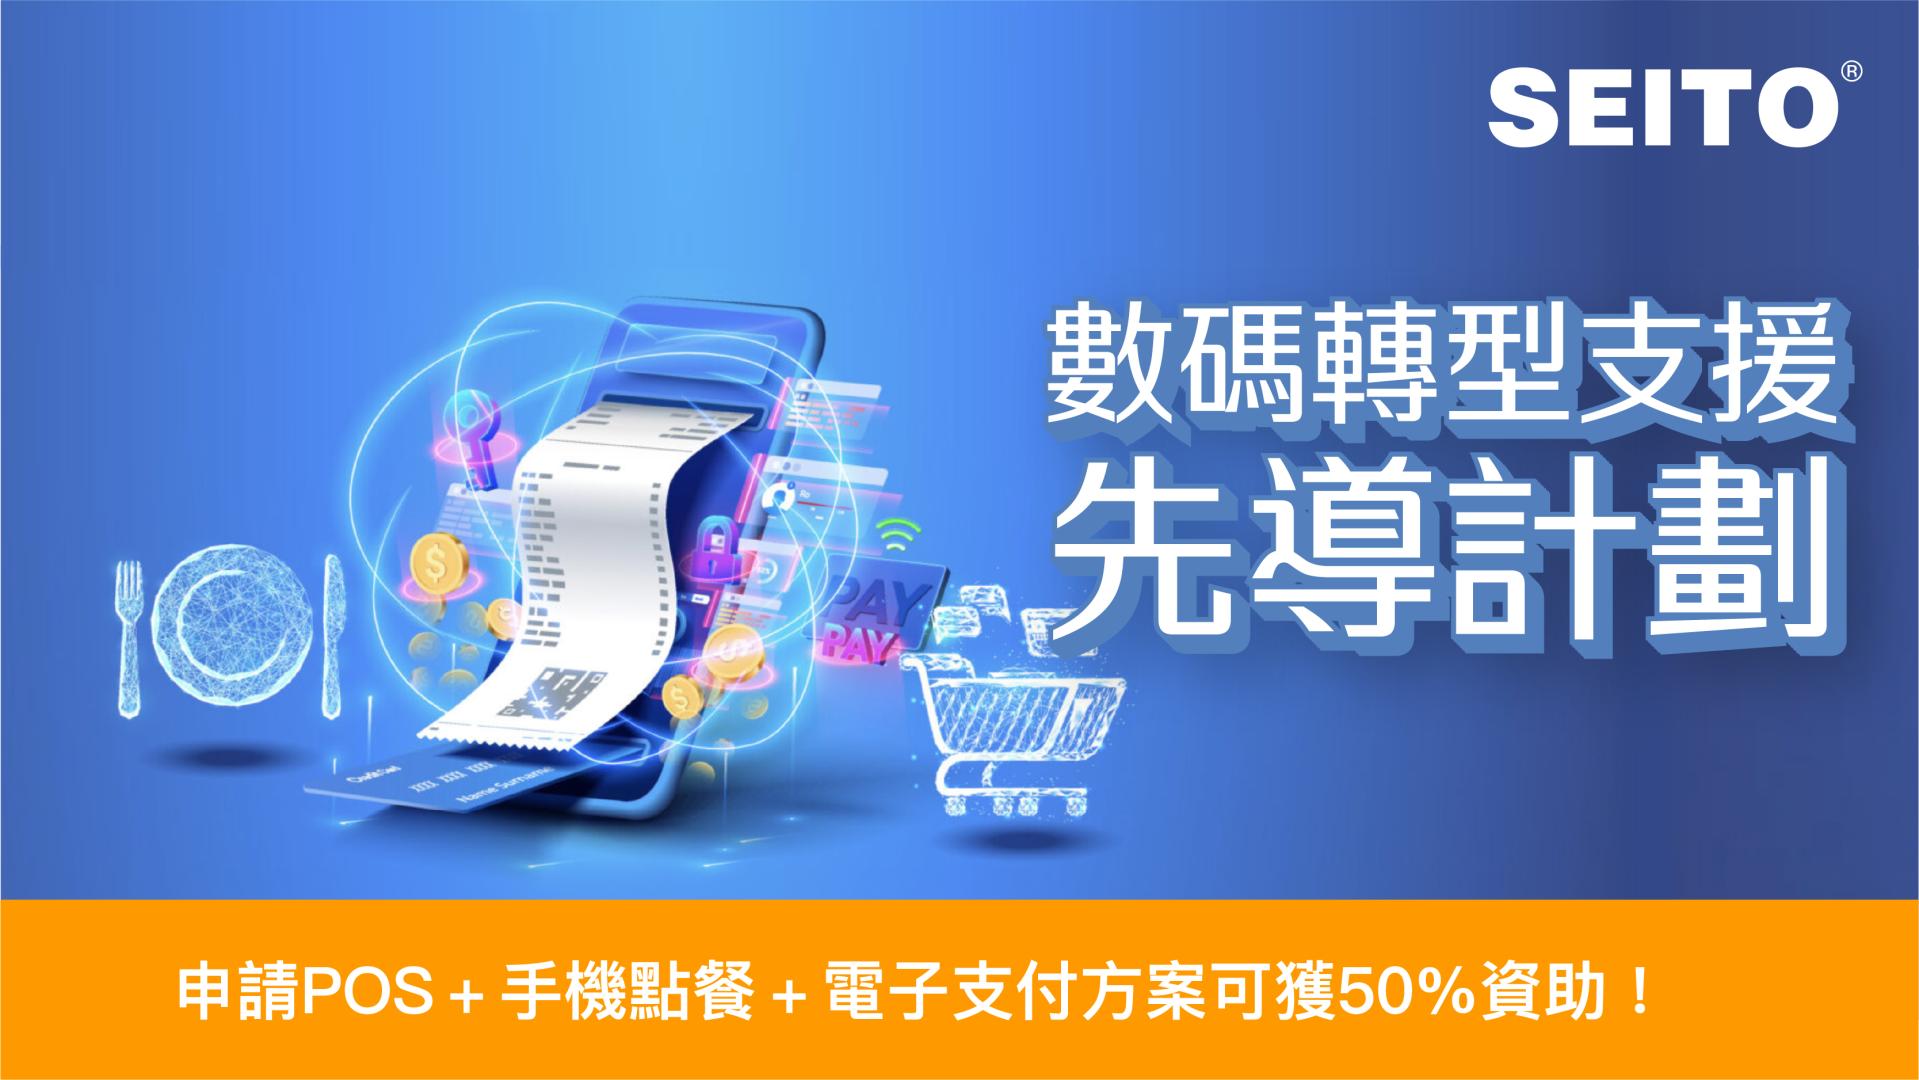 Digital Transformation Support Pilot Programme (DTSPP) - Purchase of Seito POS+ Mobile Ordering System with up to HK$50,000 discount!